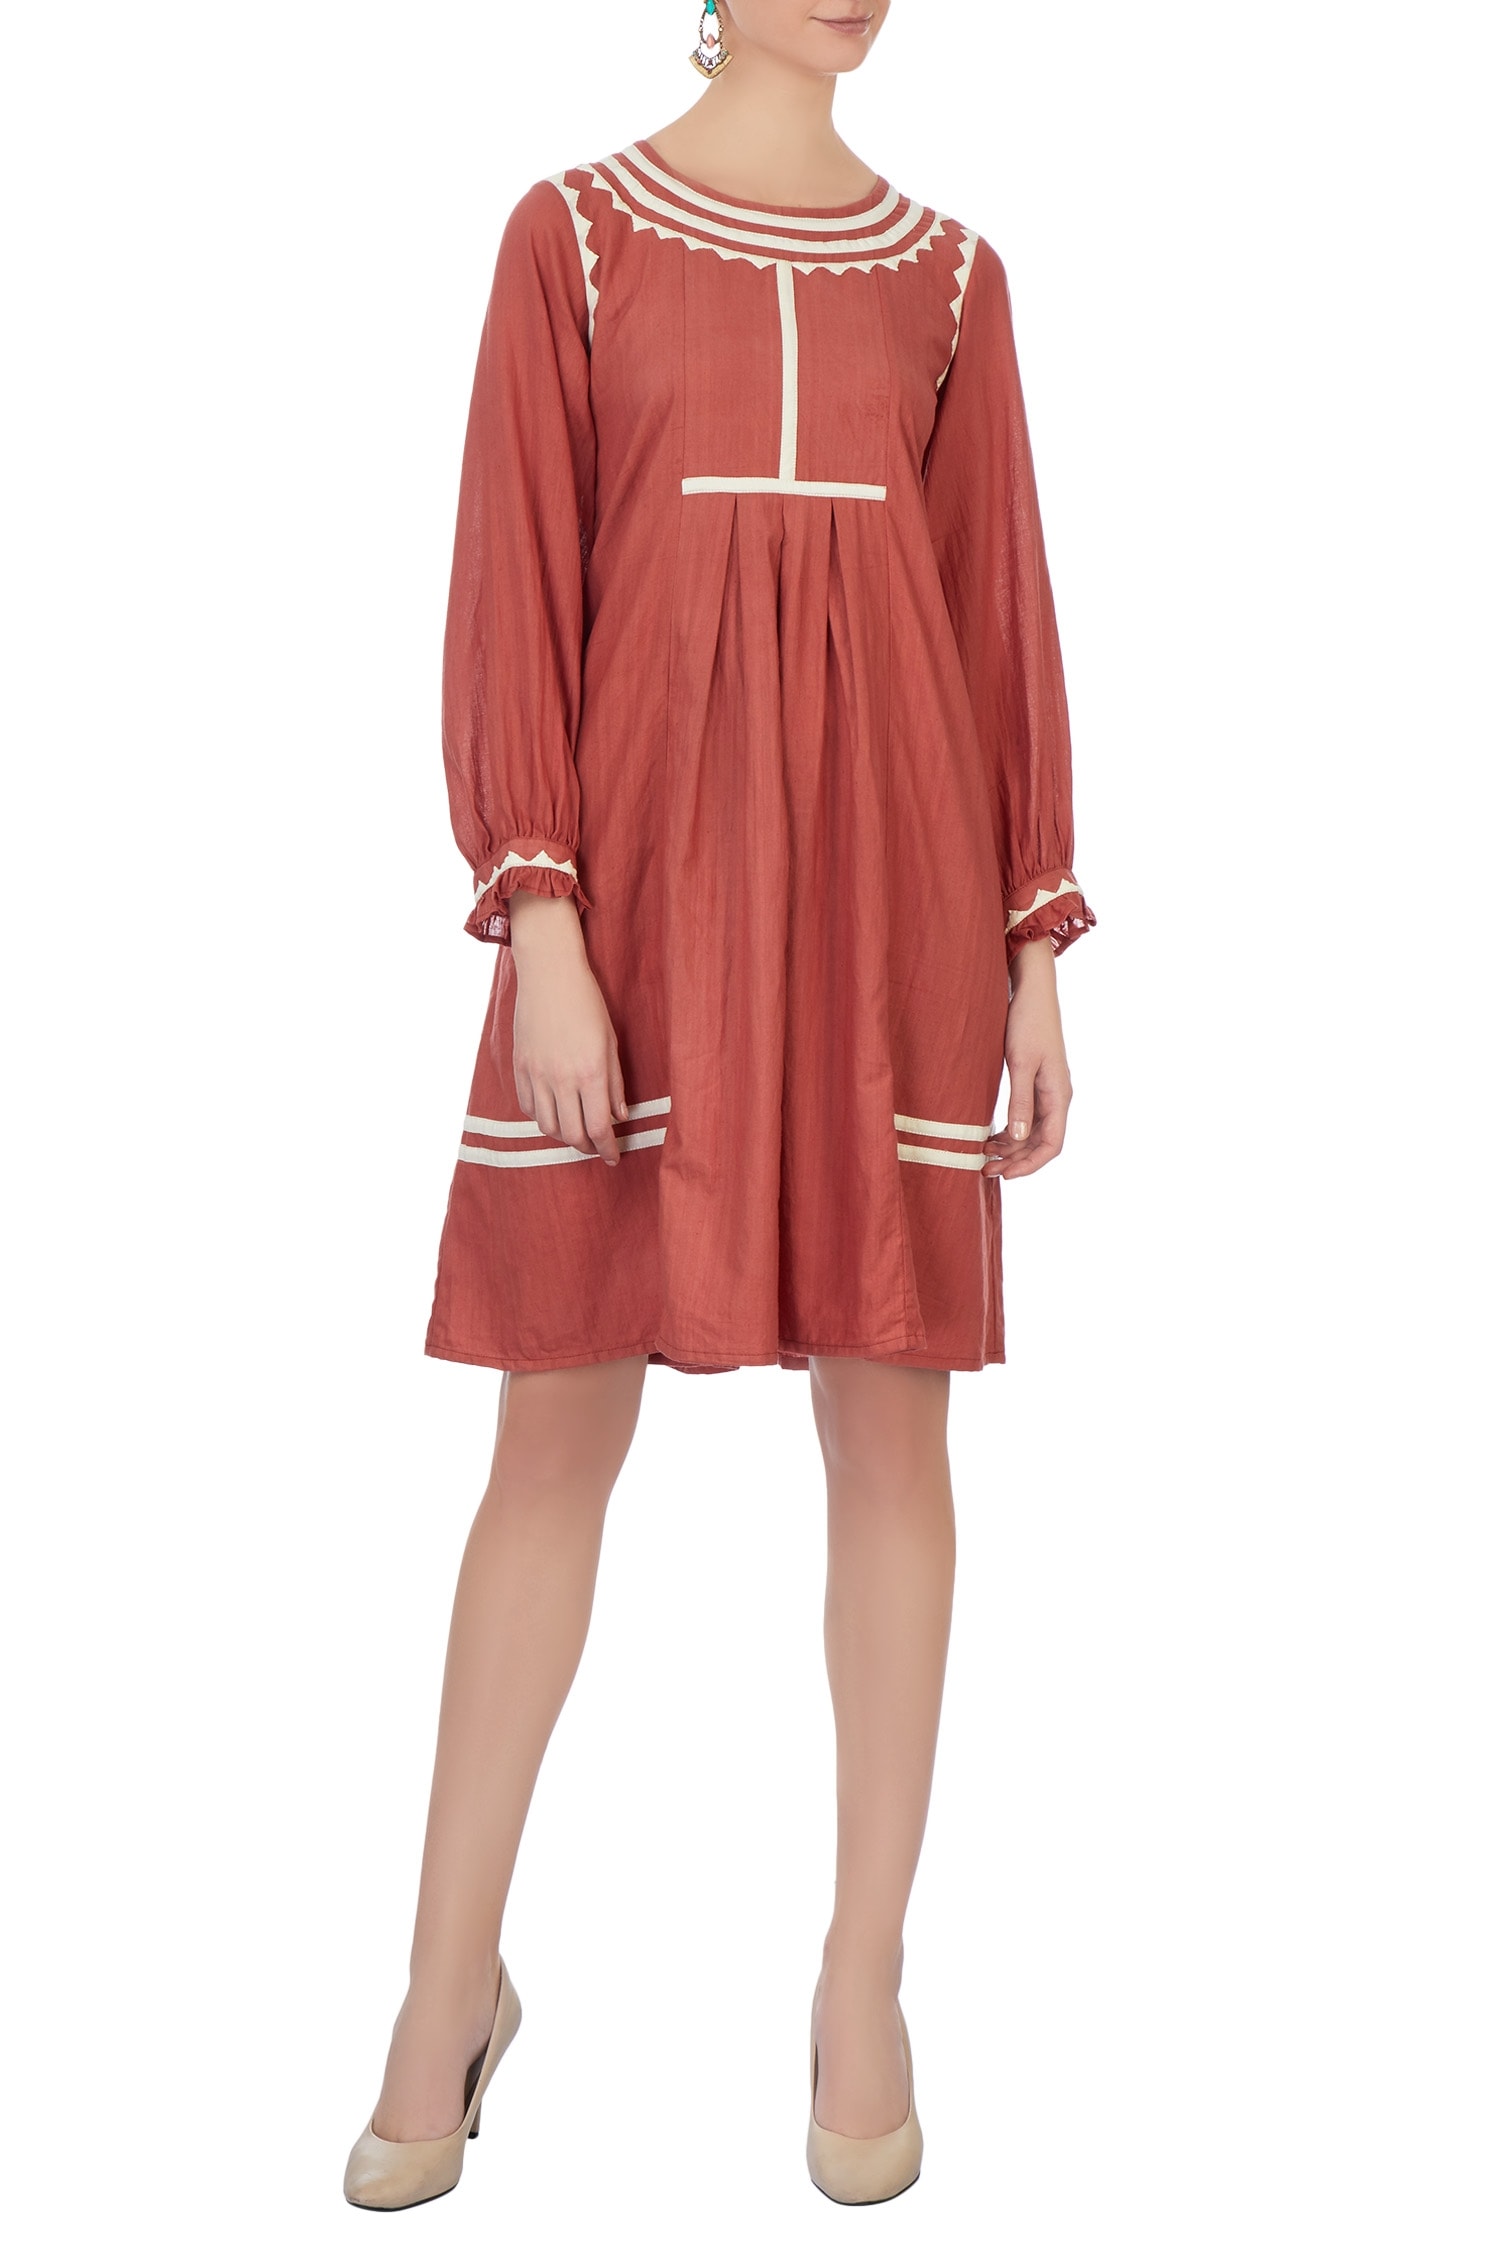 Chambray & Co. Coral Round Applique Gathered Dress For Women